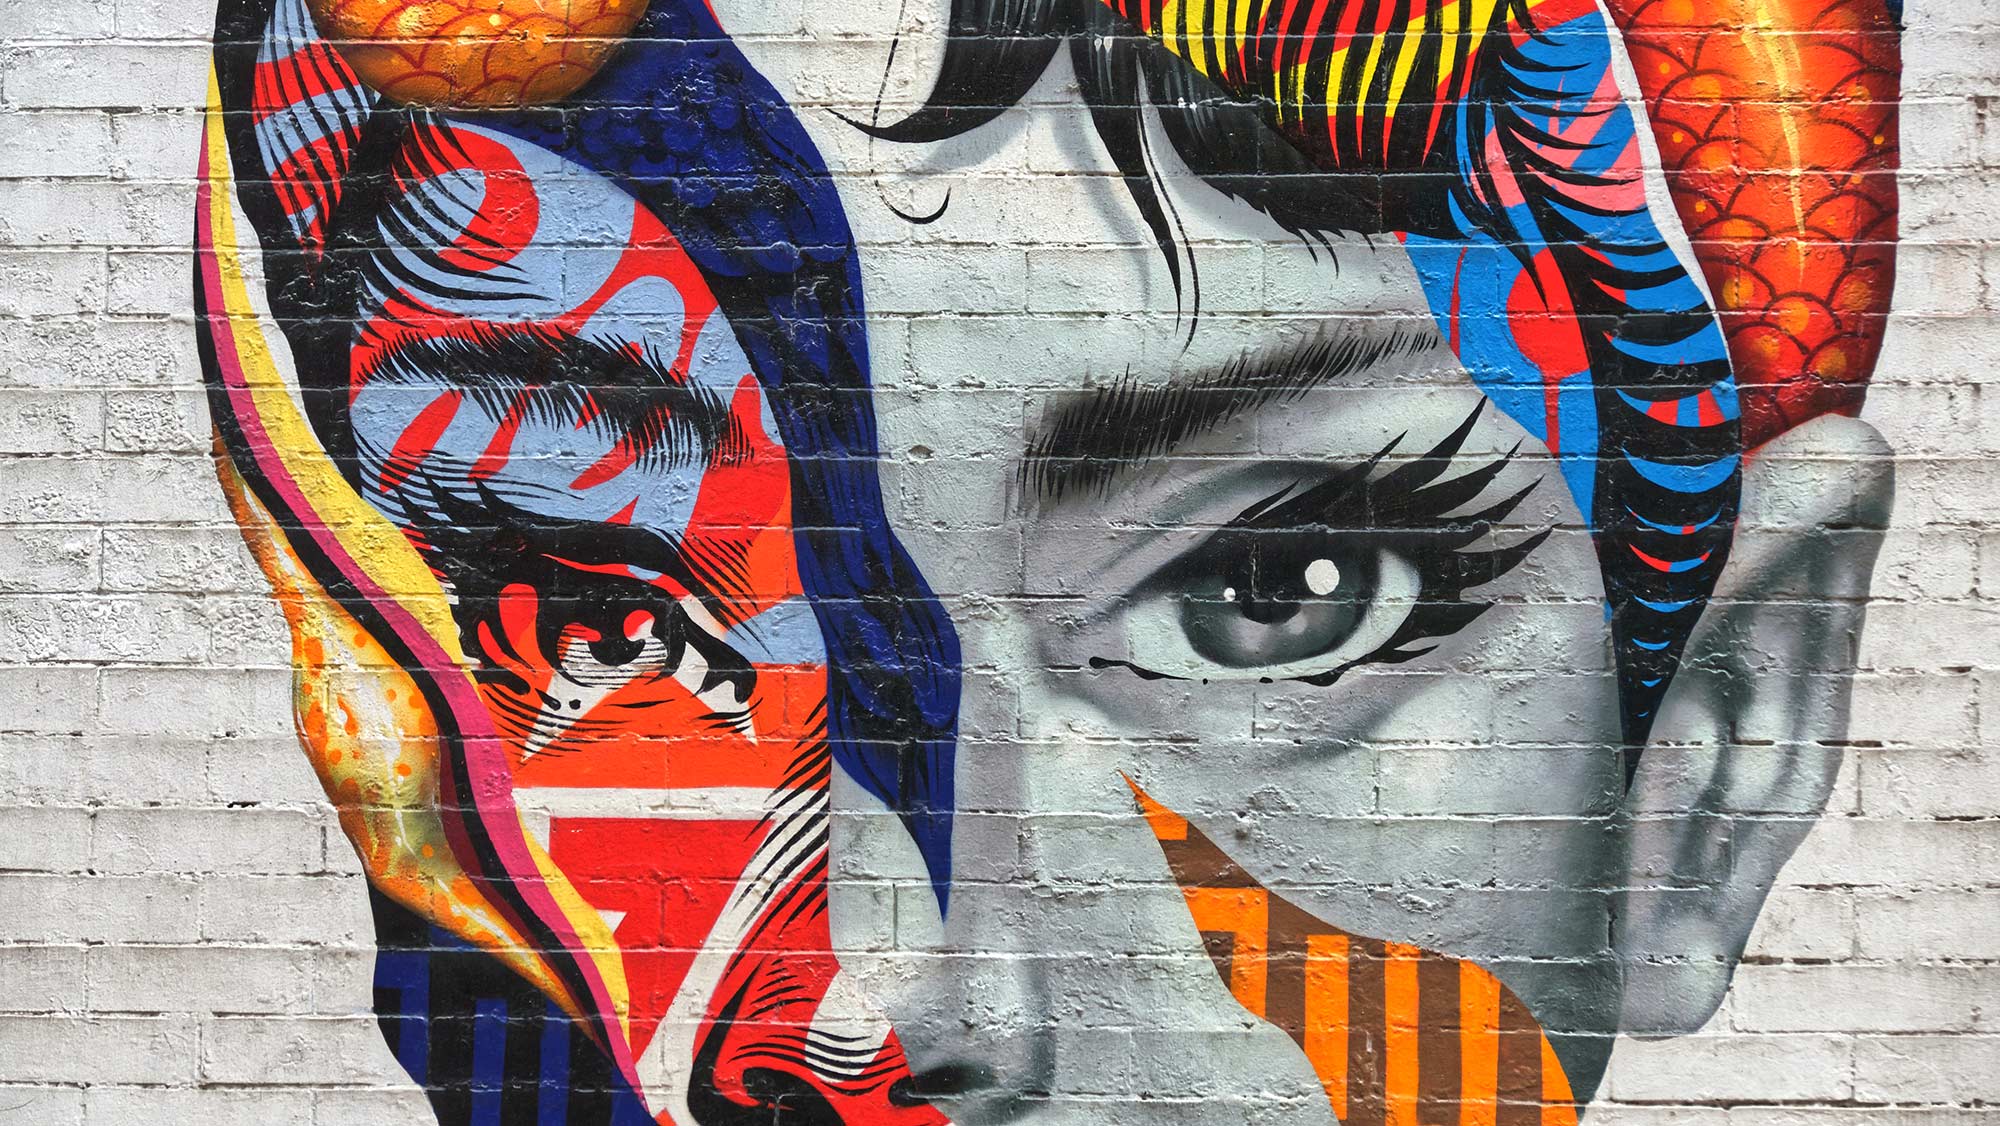 20 of the best street art cities in the world - CK Travels